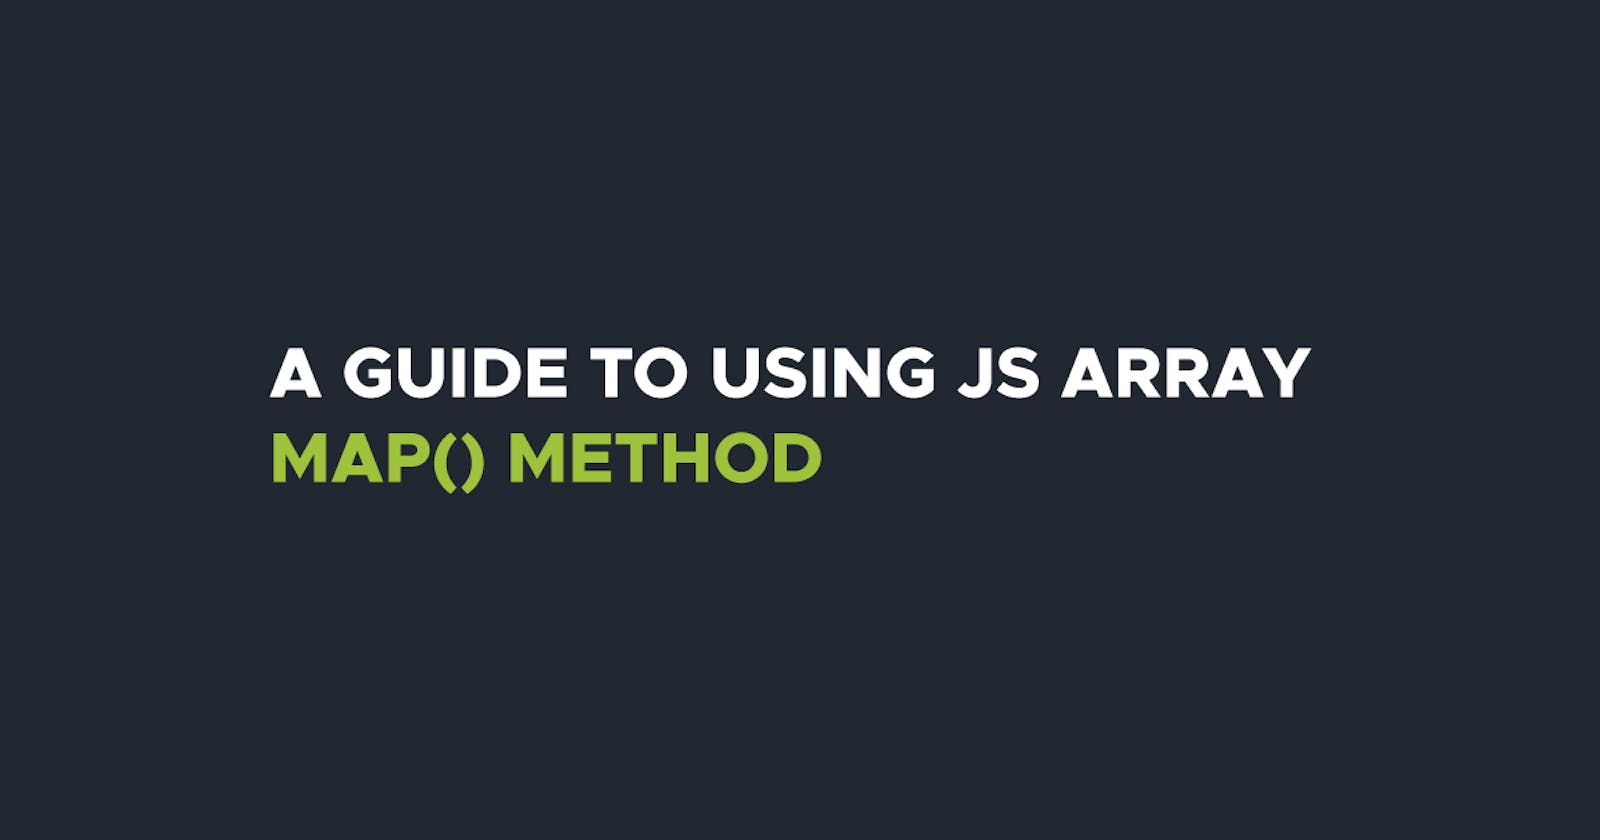 A guide to using JavaScript array map method